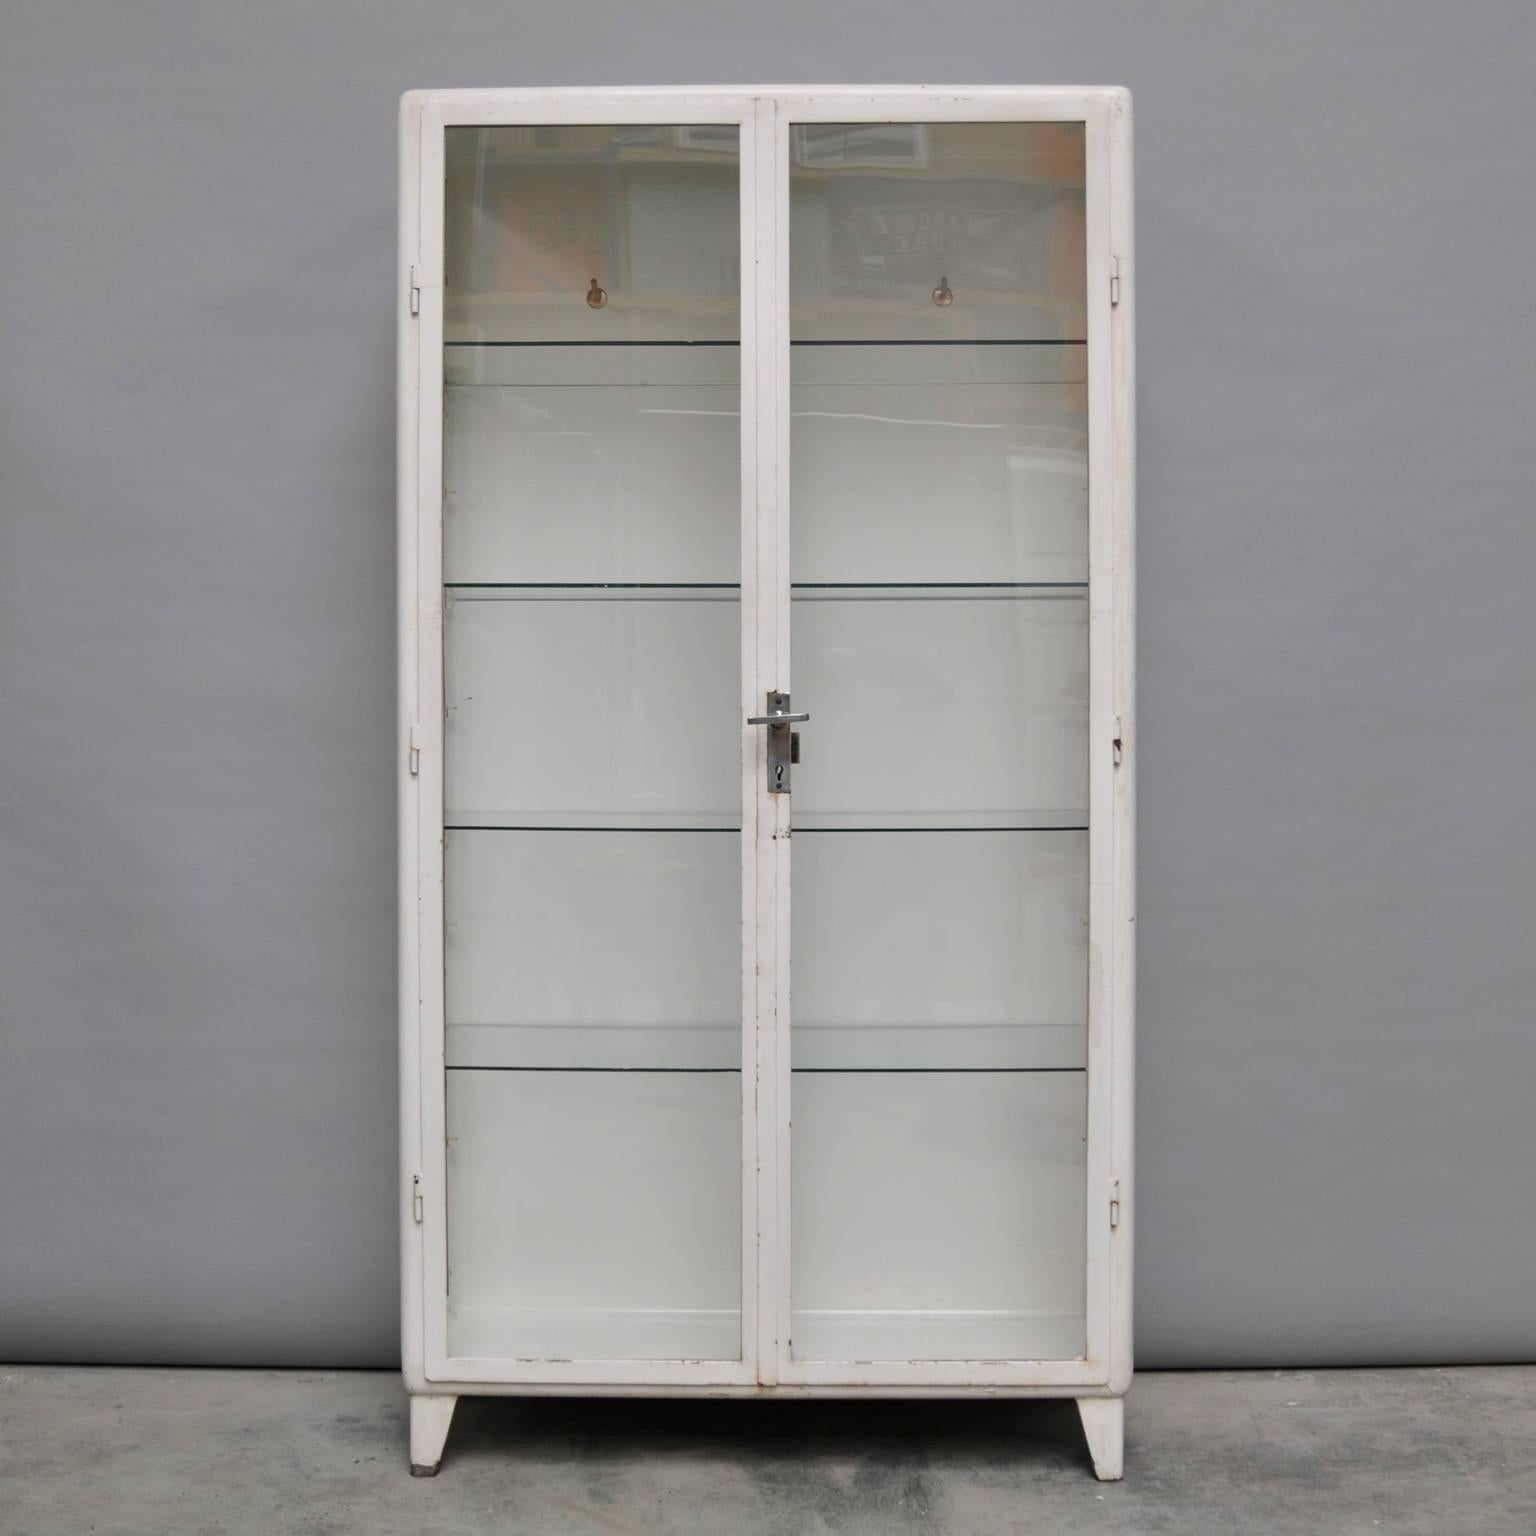 This vintage cabinet was produced in Poland during the 1950s. The cabinet is made of steel and comes with four glass shelves. The glass of the cabinet is antiqued. The inside of the cabinet features three clothing hooks.